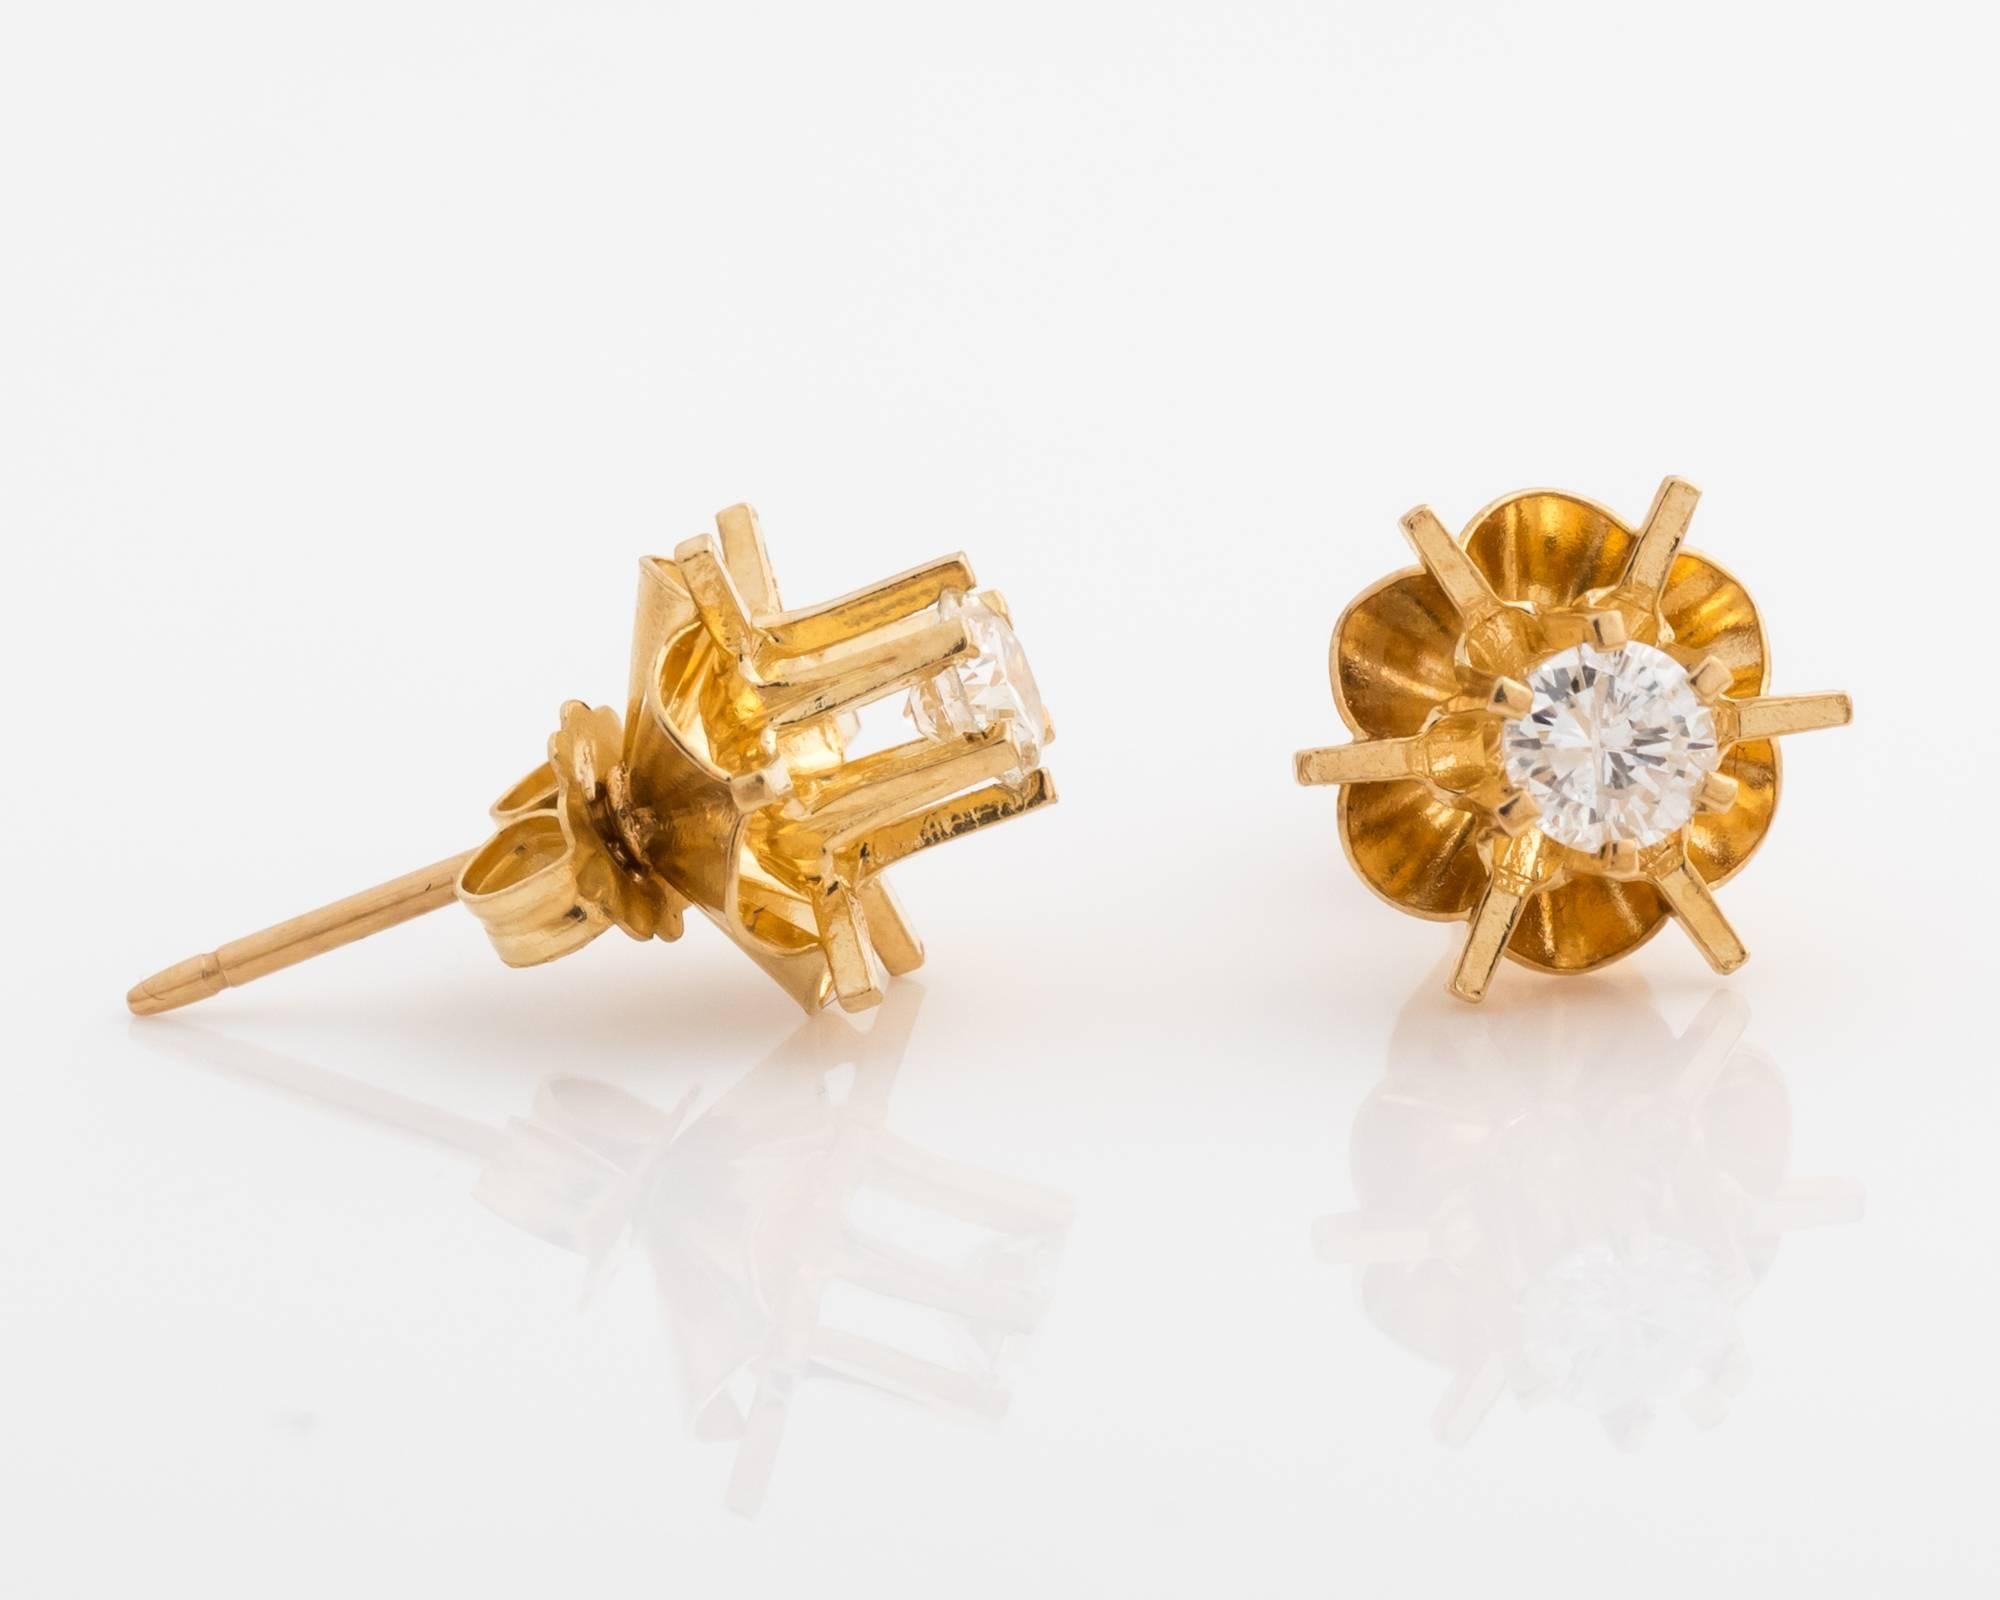 

1950s Old European Diamond Studs
Crafted in 14 Karat Yellow Gold
Fresh, Unique Design 
Great Condition - no surface scratches on the diamonds, nor dents or abrasions on the gold
Tulip Design with a High Mount and Extended 